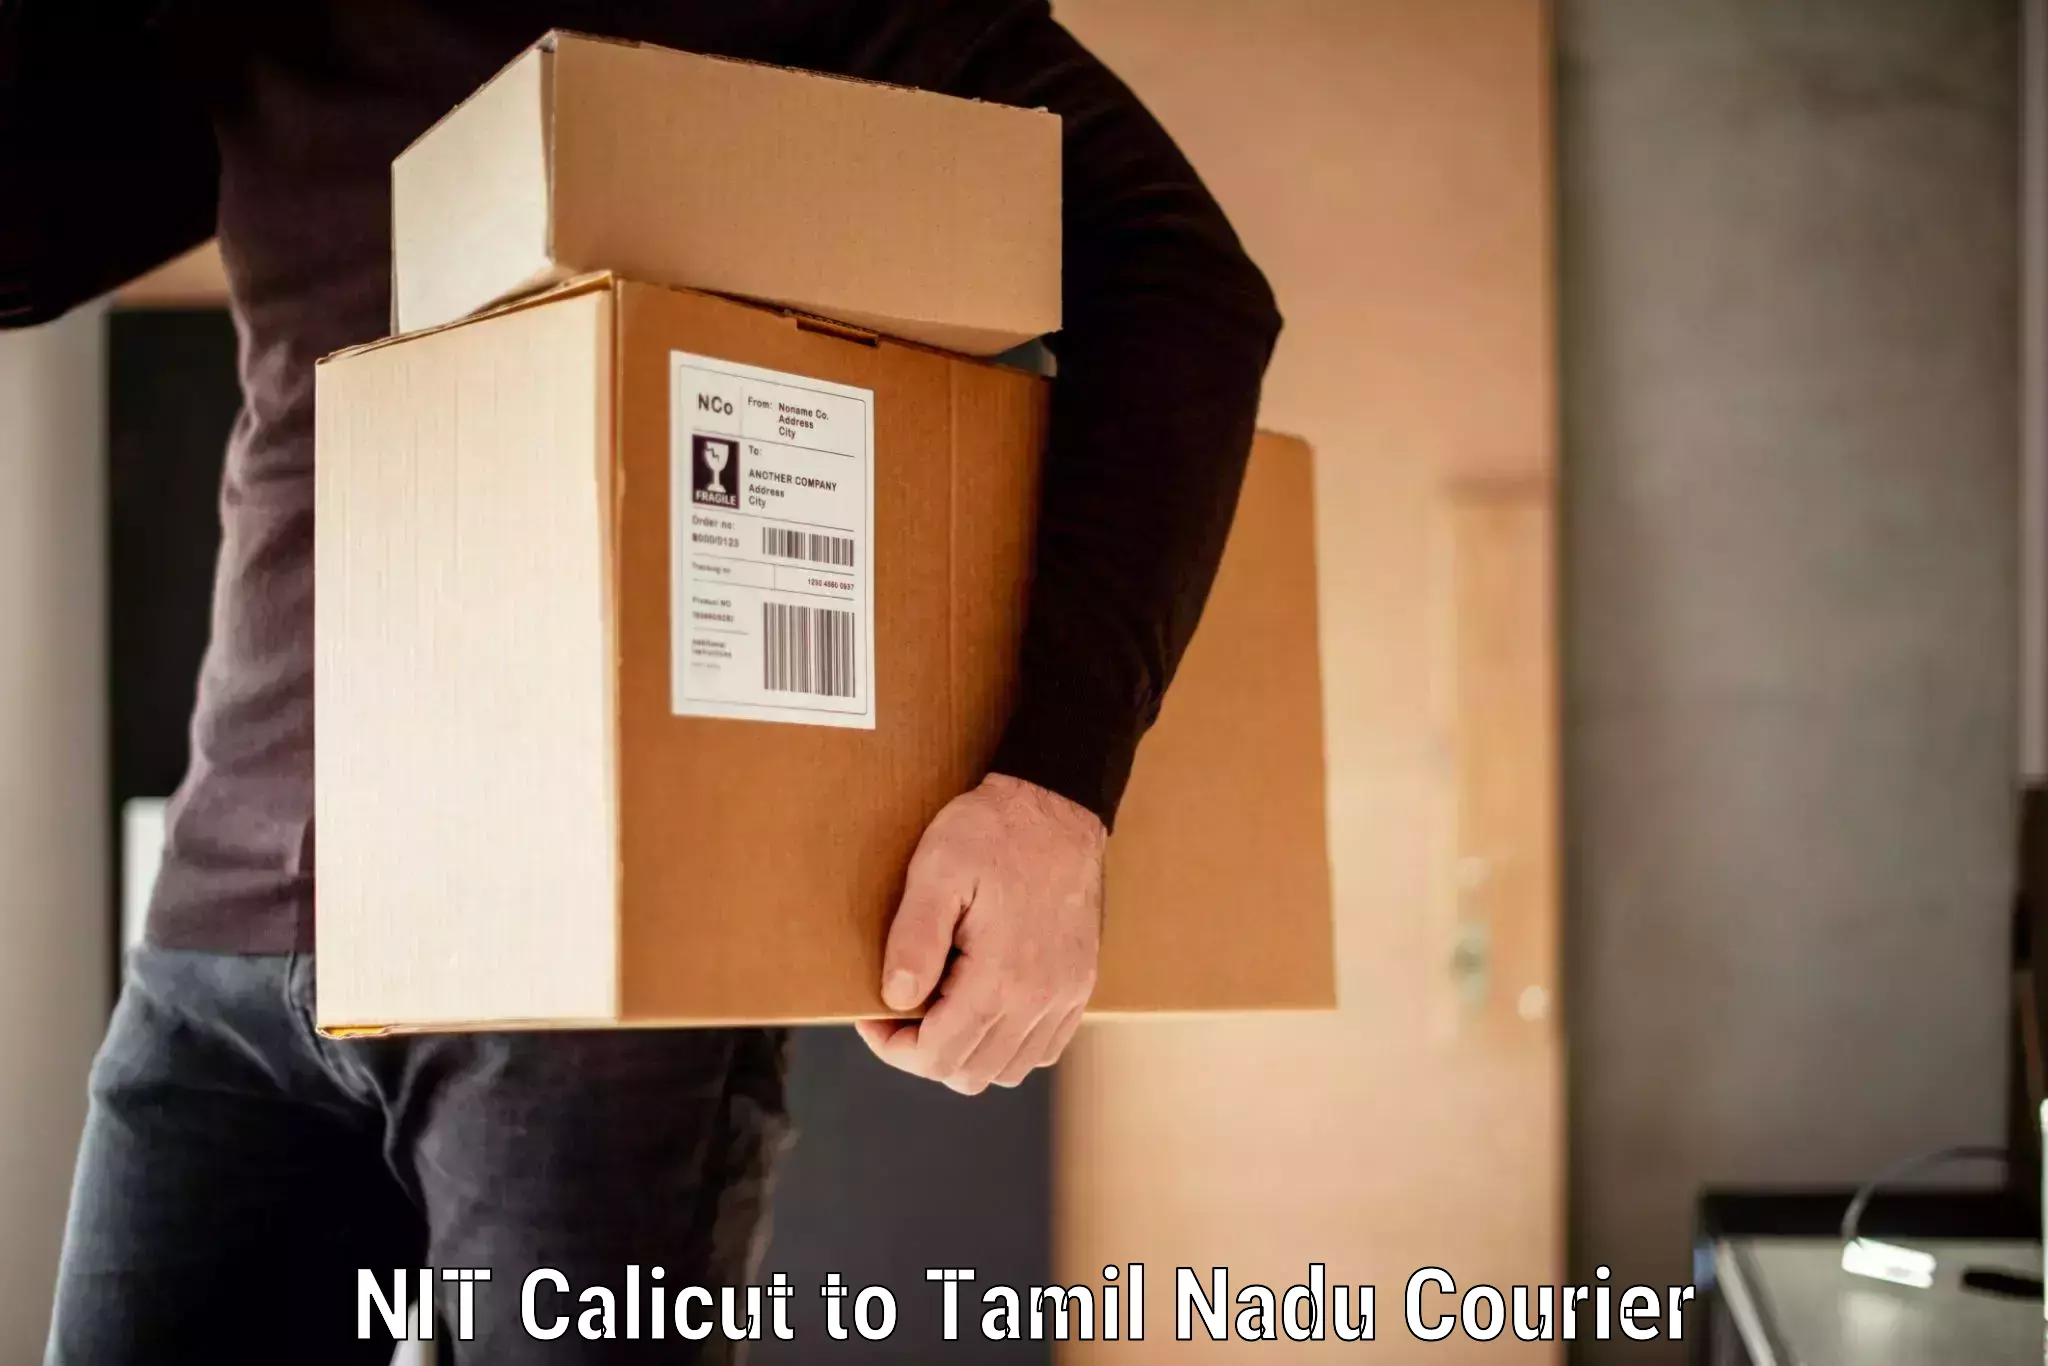 Instant baggage transport quote NIT Calicut to Tamil Nadu